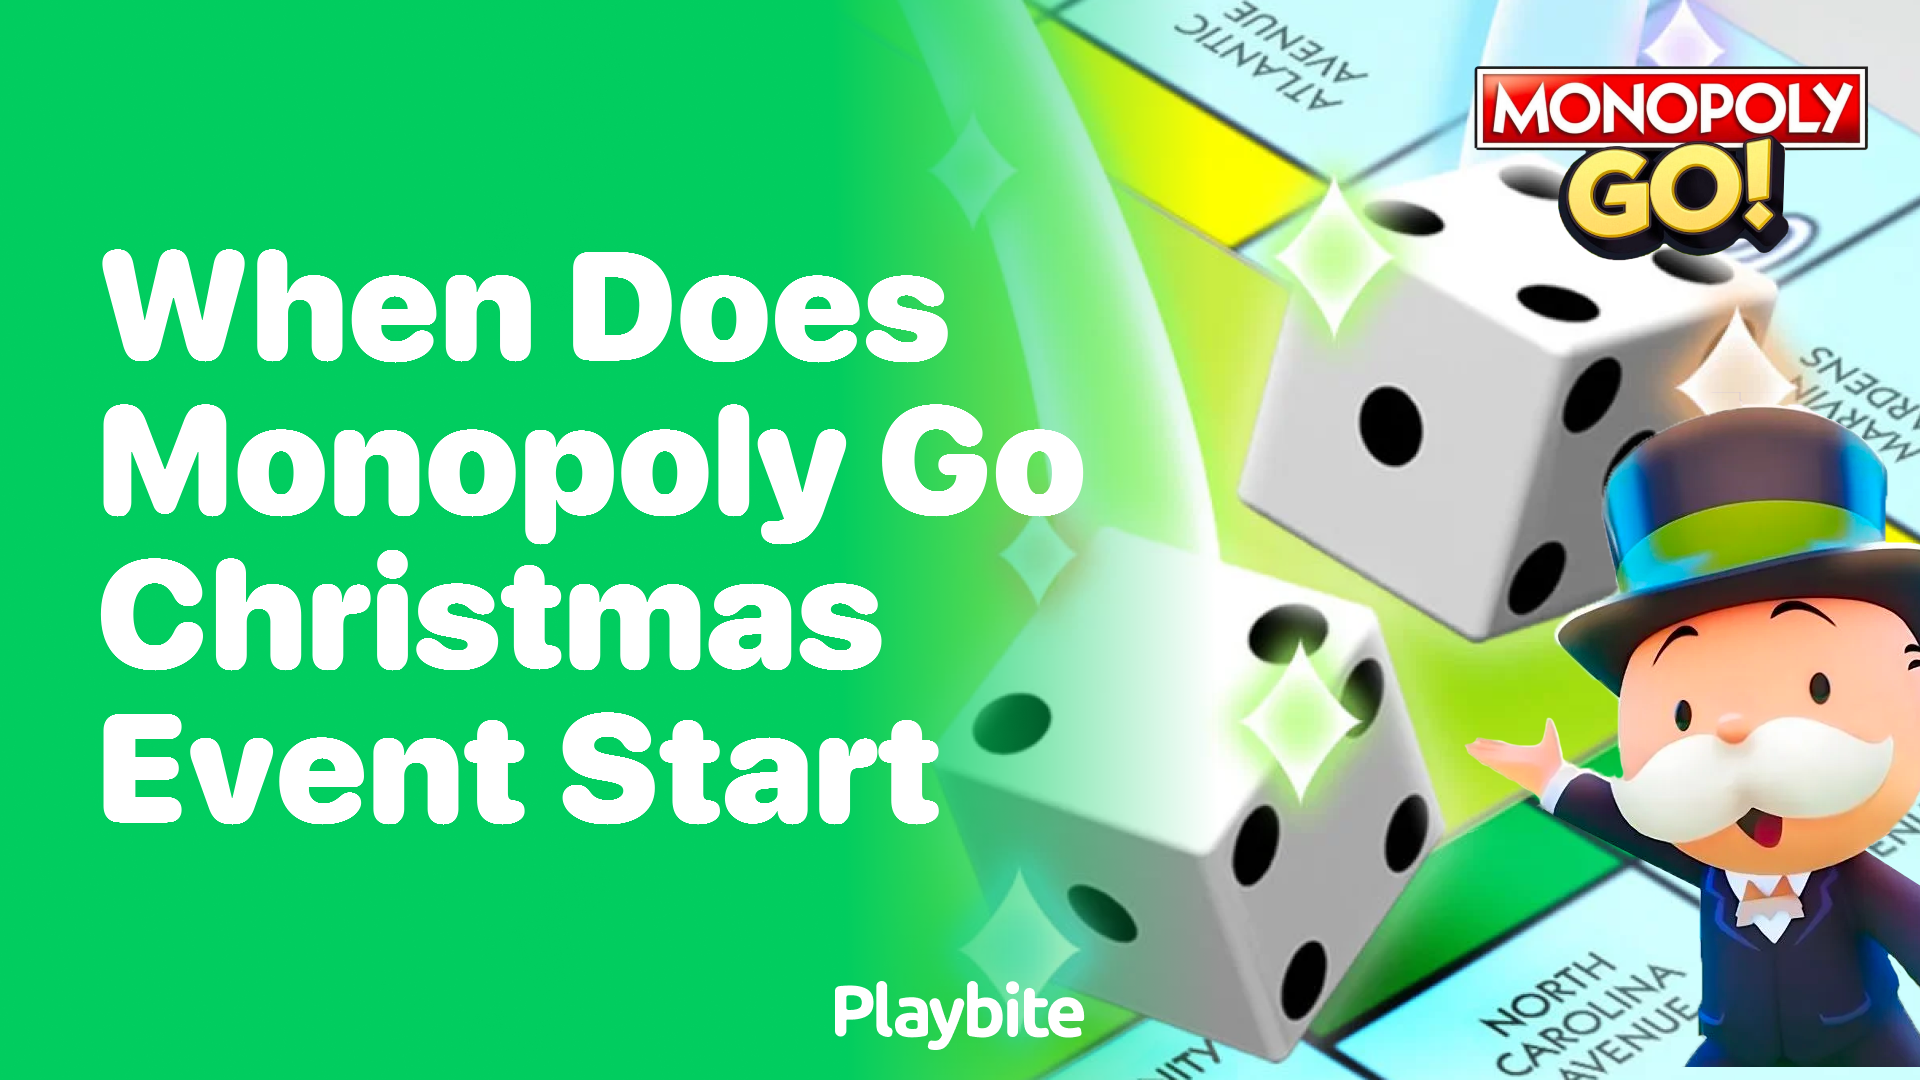 When Does the Monopoly Go Christmas Event Start?